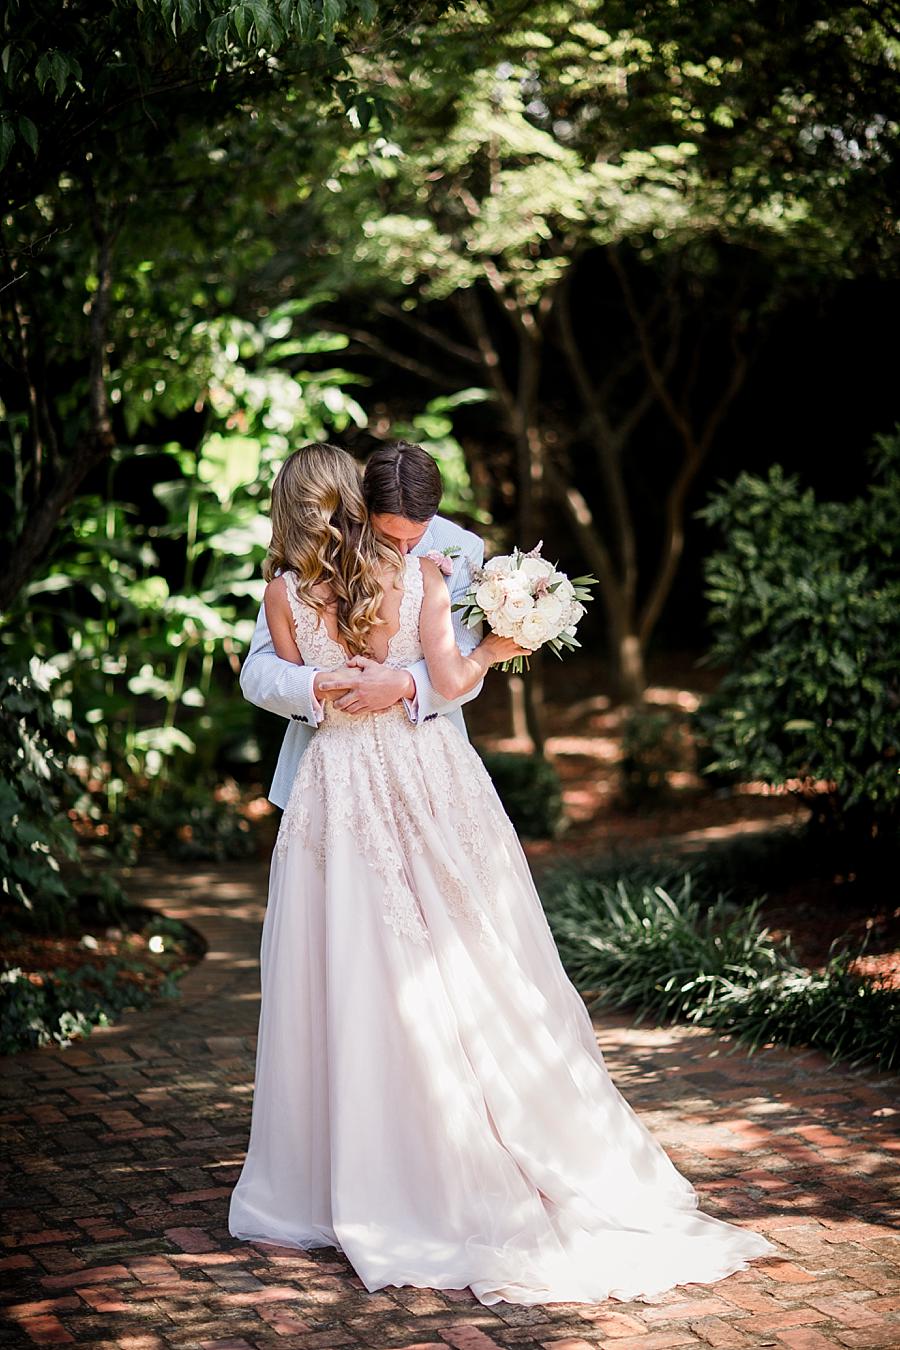 Hugging on first look at this East Ivy Mansion Wedding session by Knoxville Wedding Photographer, Amanda May Photos.